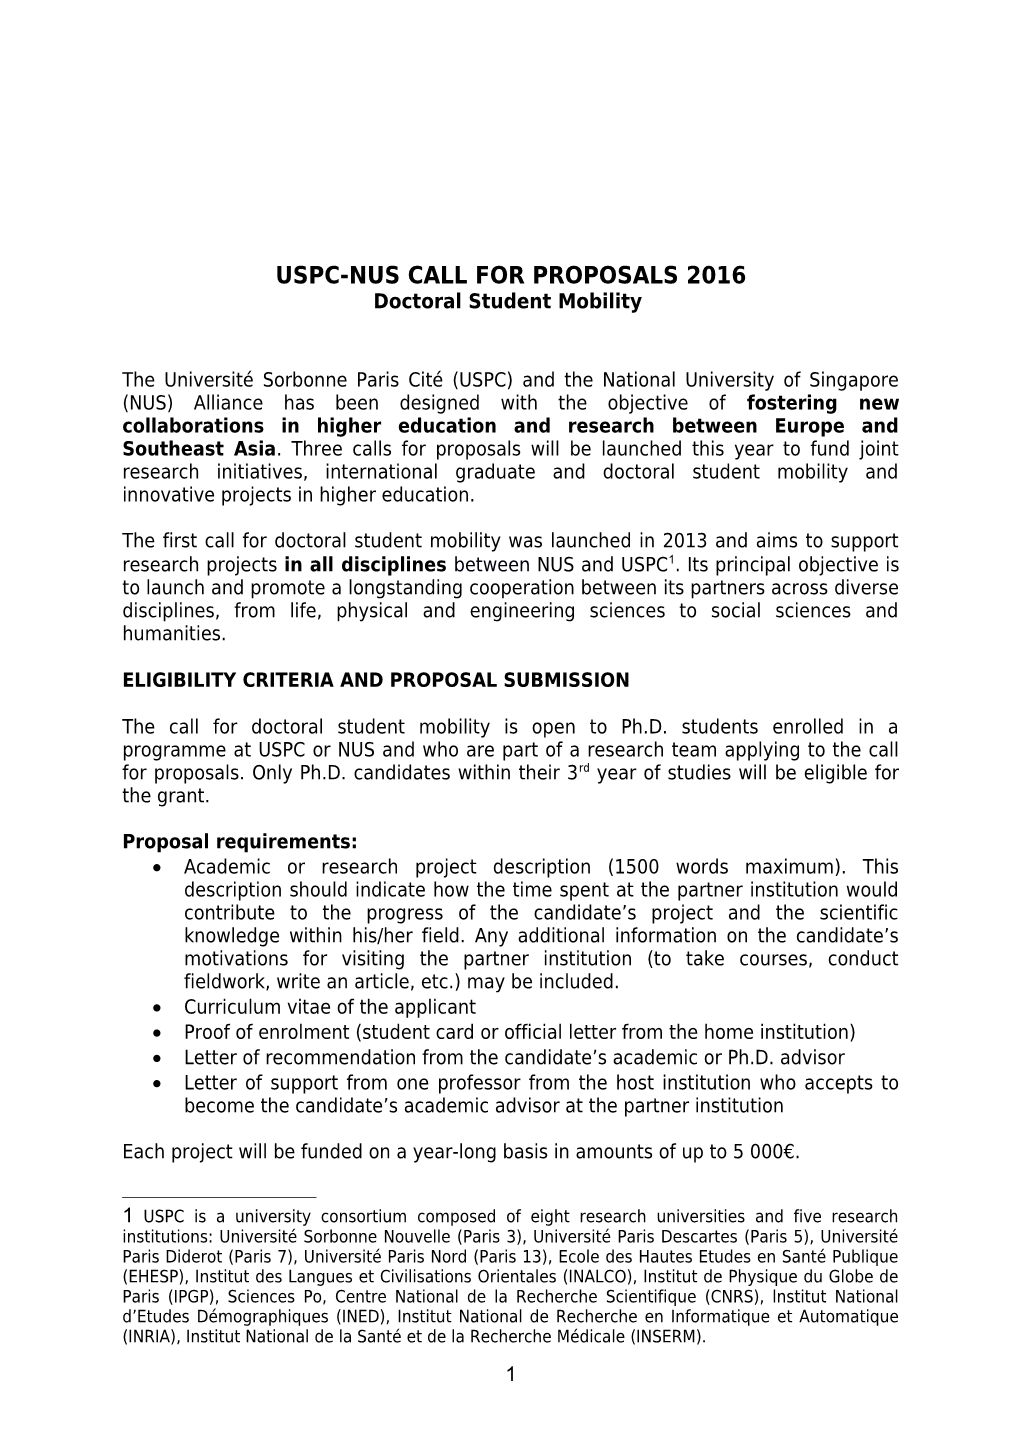 USPC-NUS Call for Proposals Phd Mobility